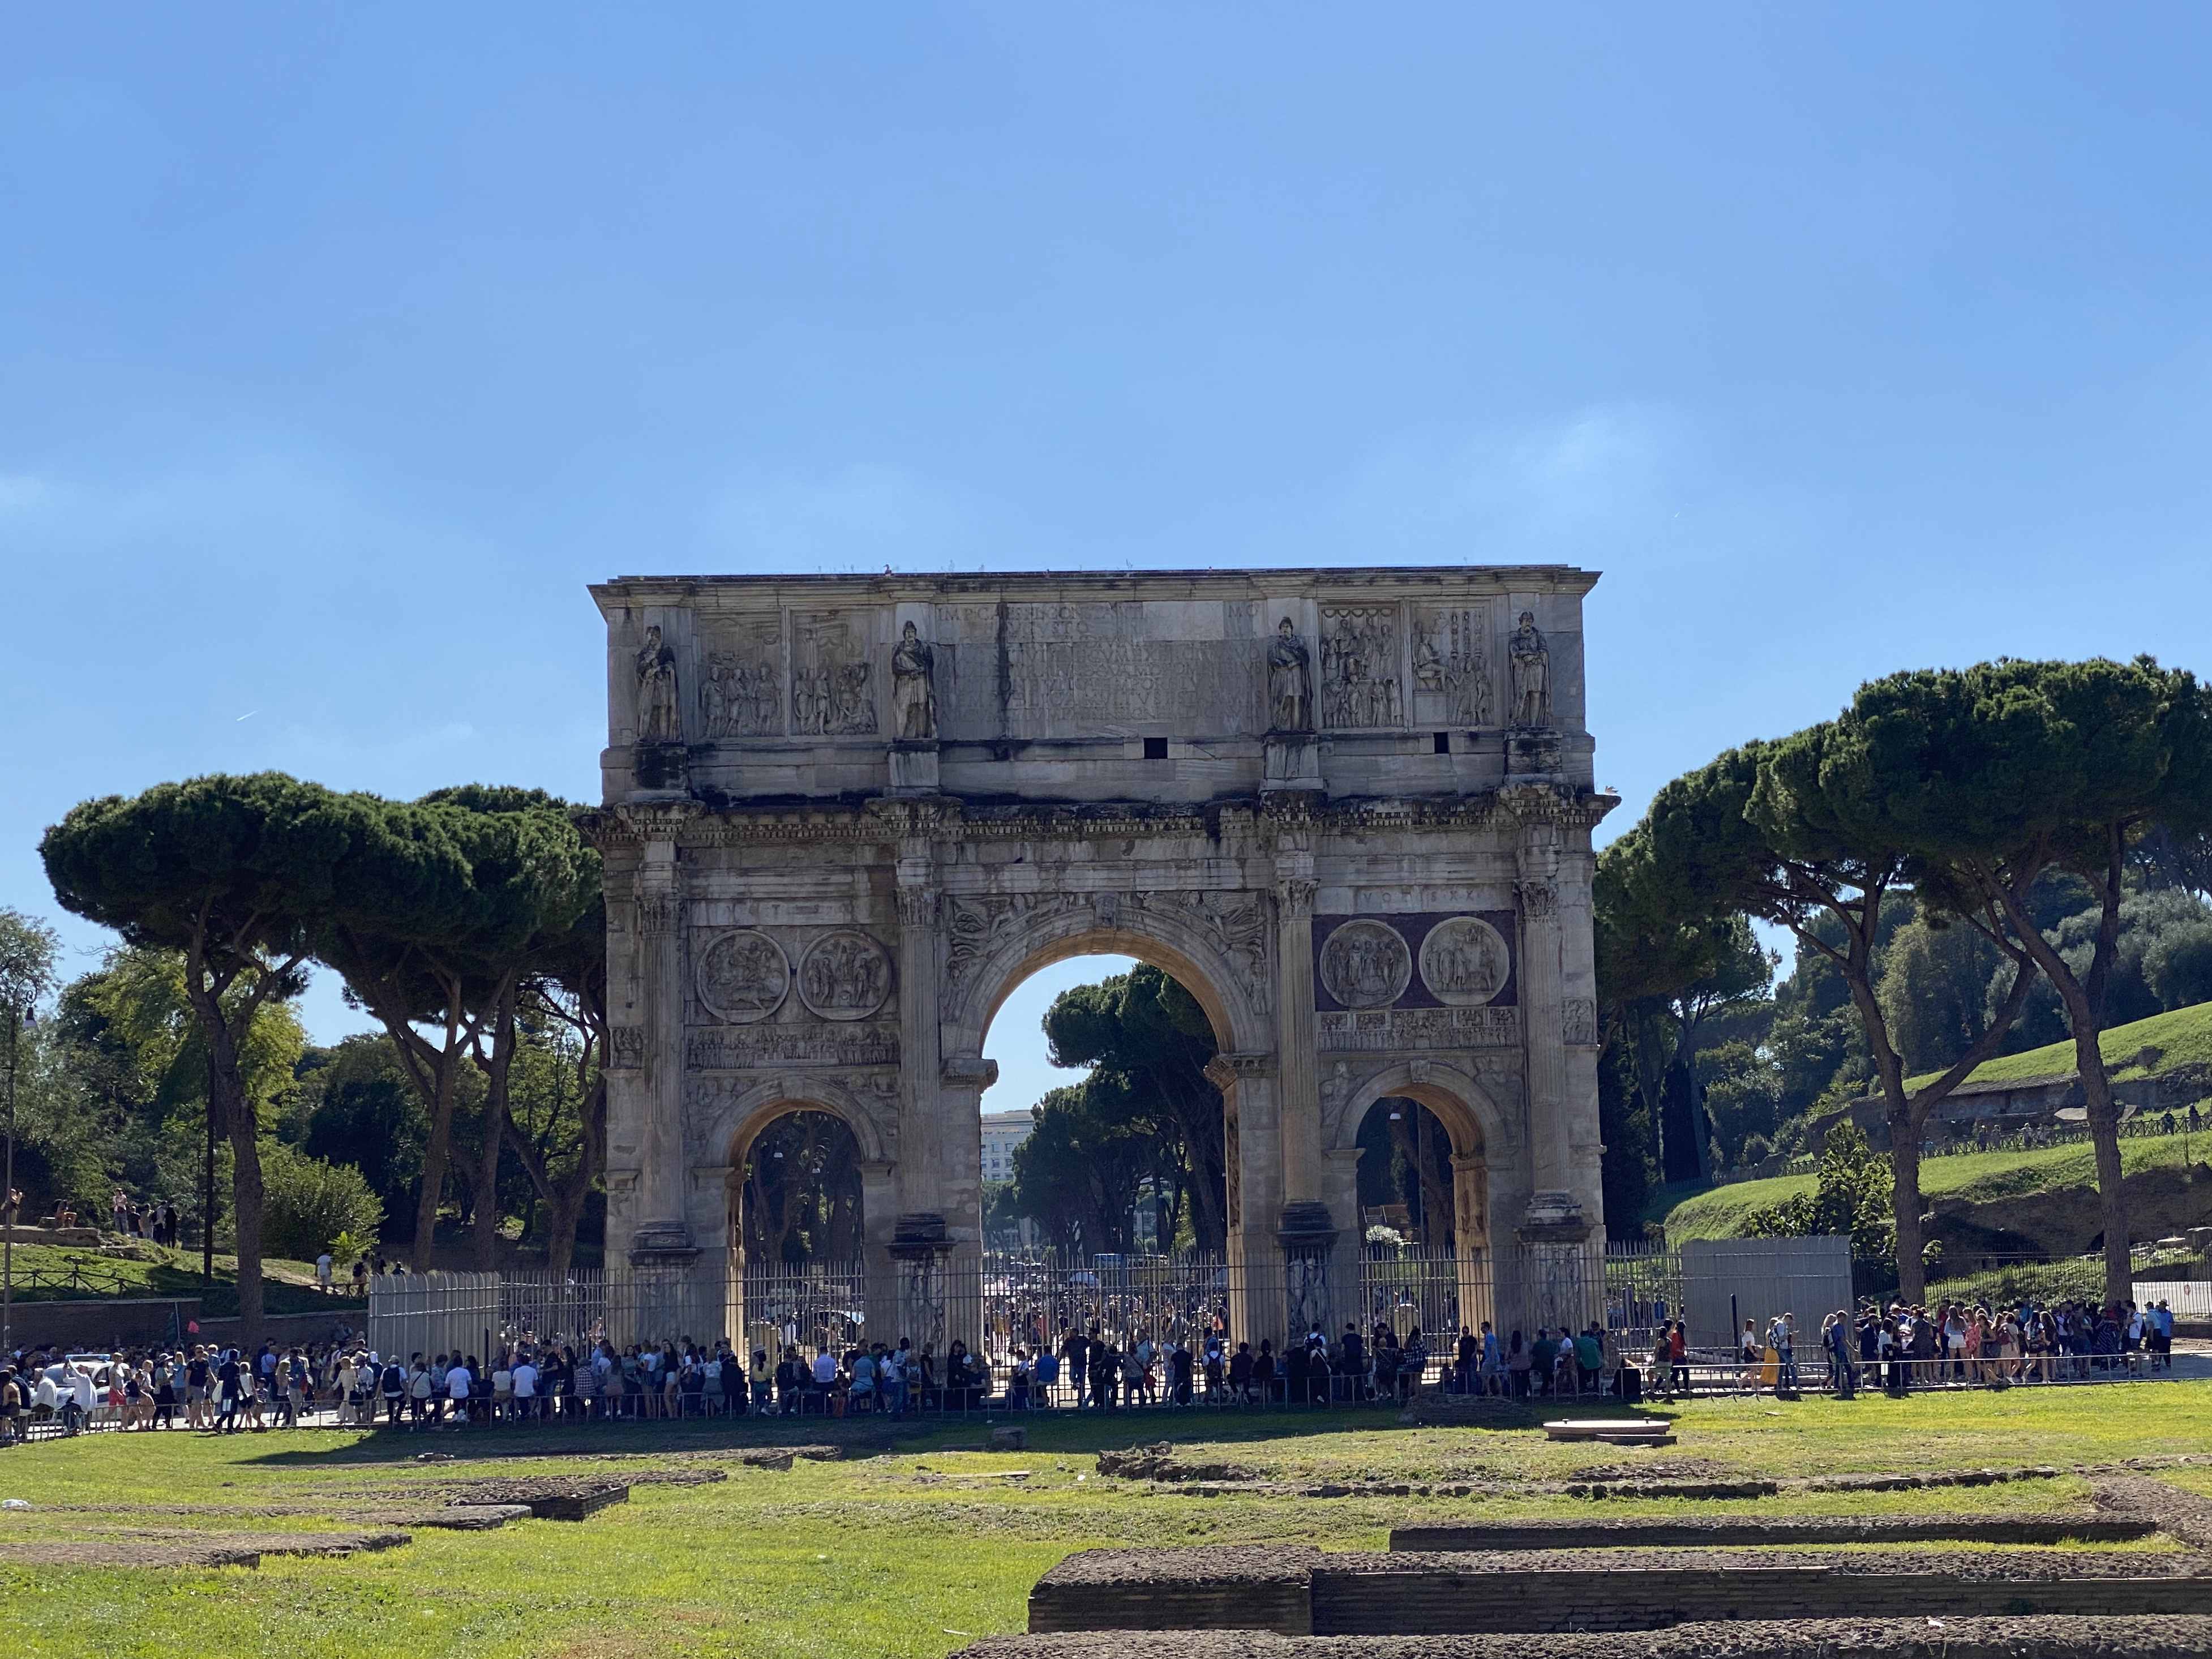 The Arch of Constantine, constructed between 312 and 315, captured with the telephoto camera.